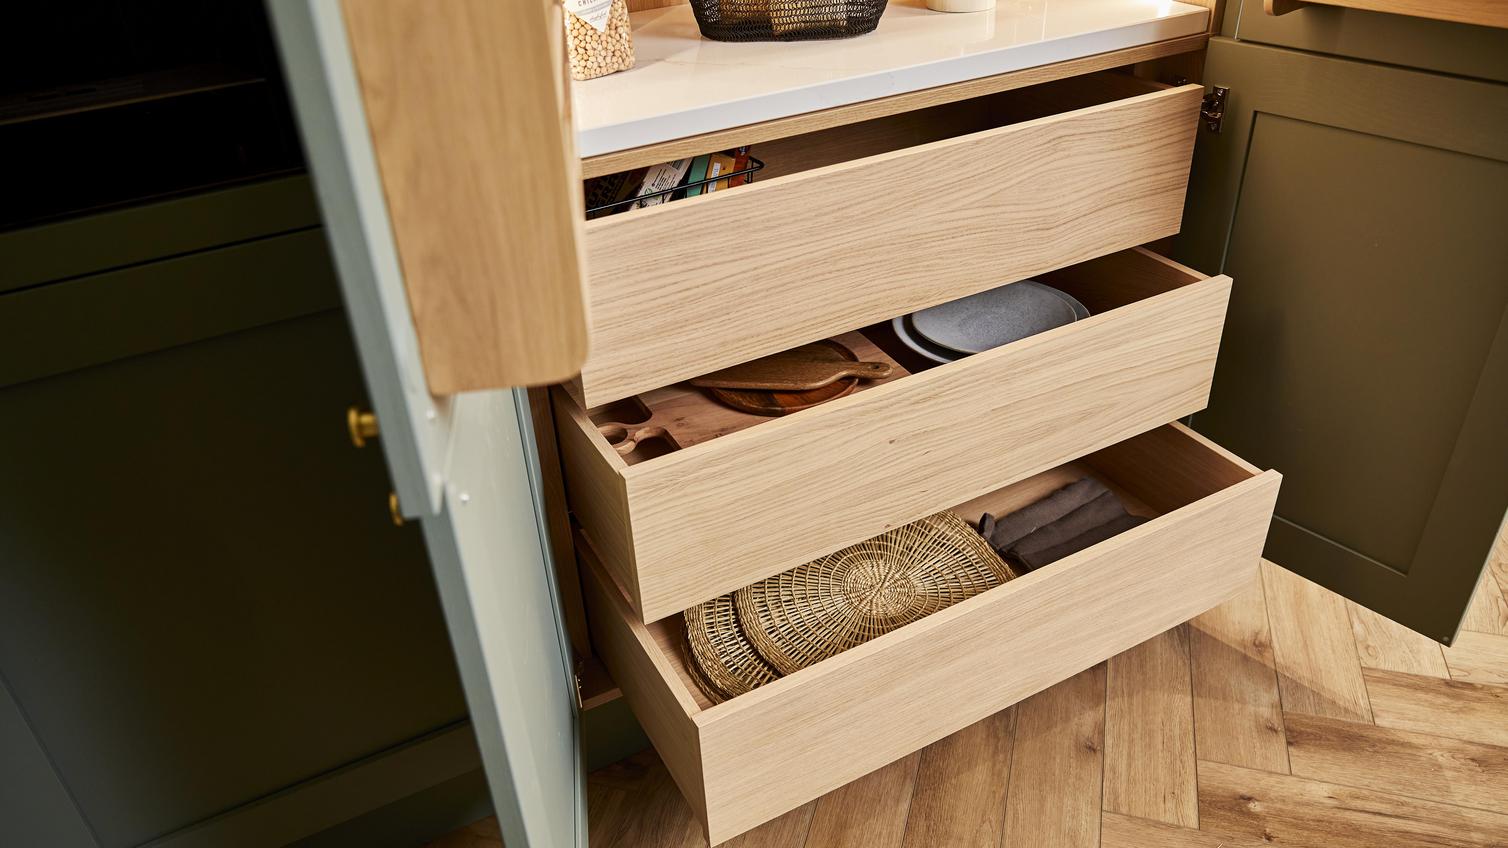 Deep oak internal drawers inside a sage green shaker pantry unit, with place mats and accessories shown in the drawer.